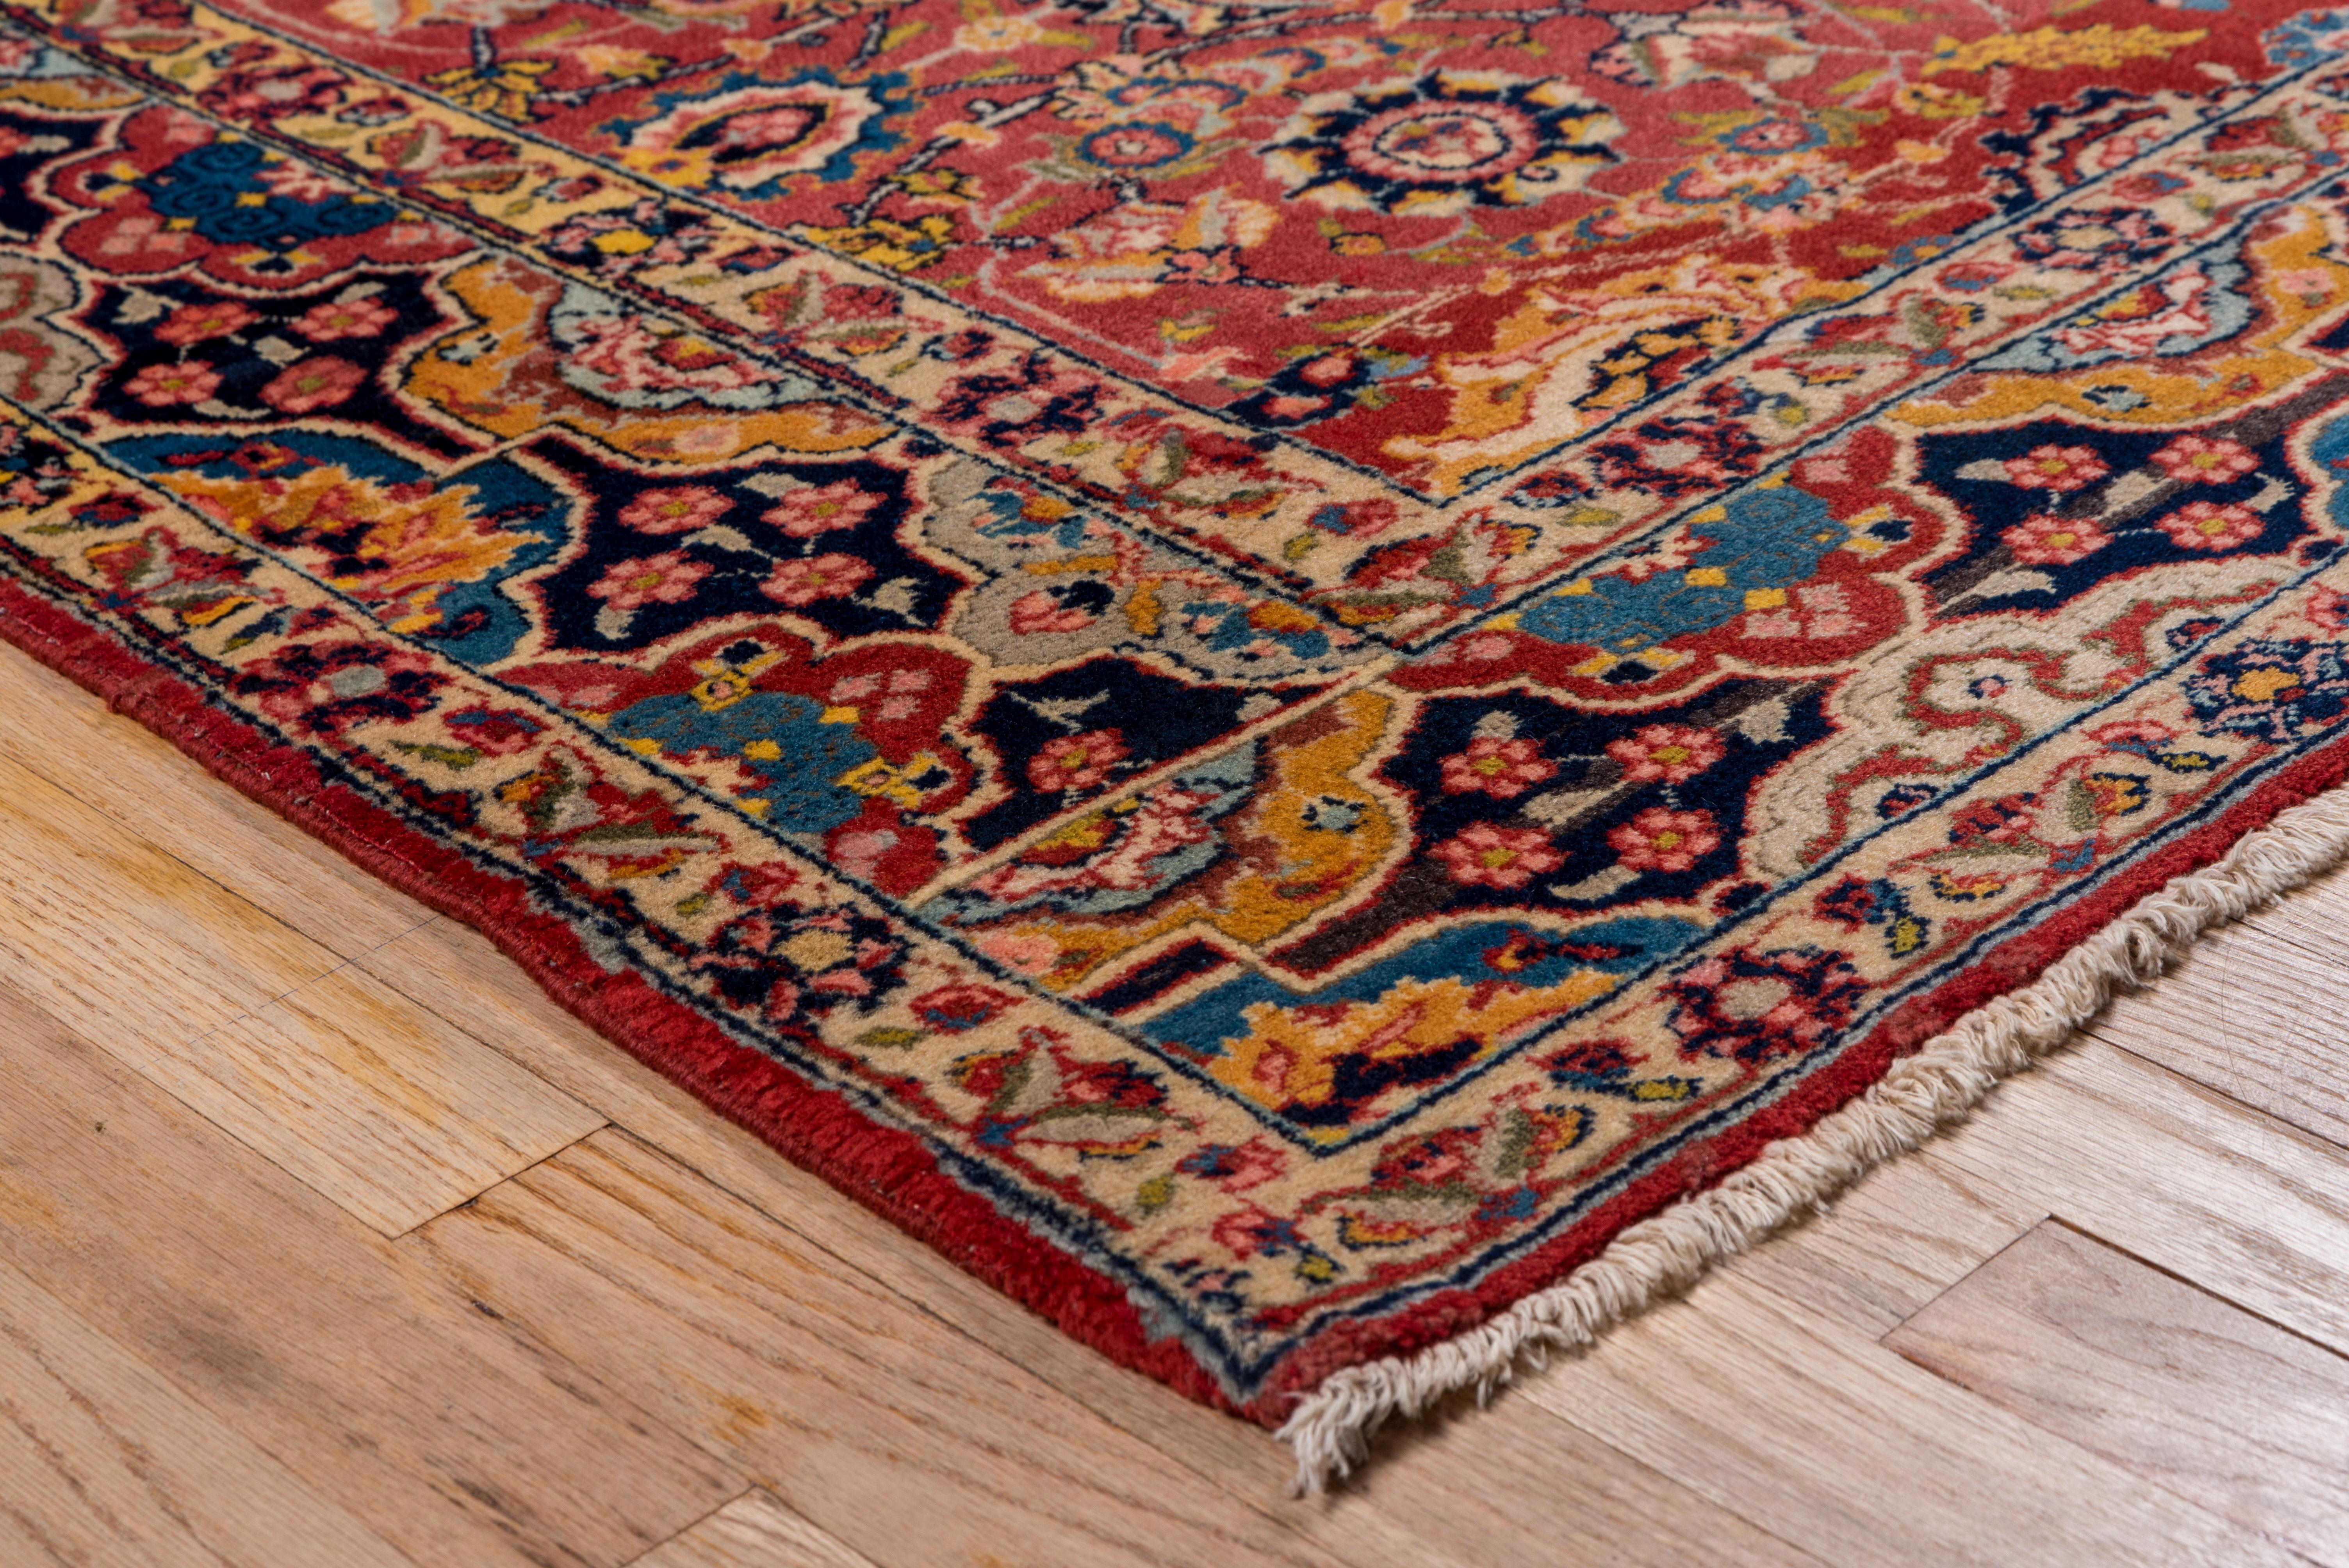 In the classical manner, this top condition, thick pile well-woven NW Persian city scatter features a red field with racemes, rinceaux, various palmettes and rosettes and layered laurel branches, all within a navy border with half cartouches in